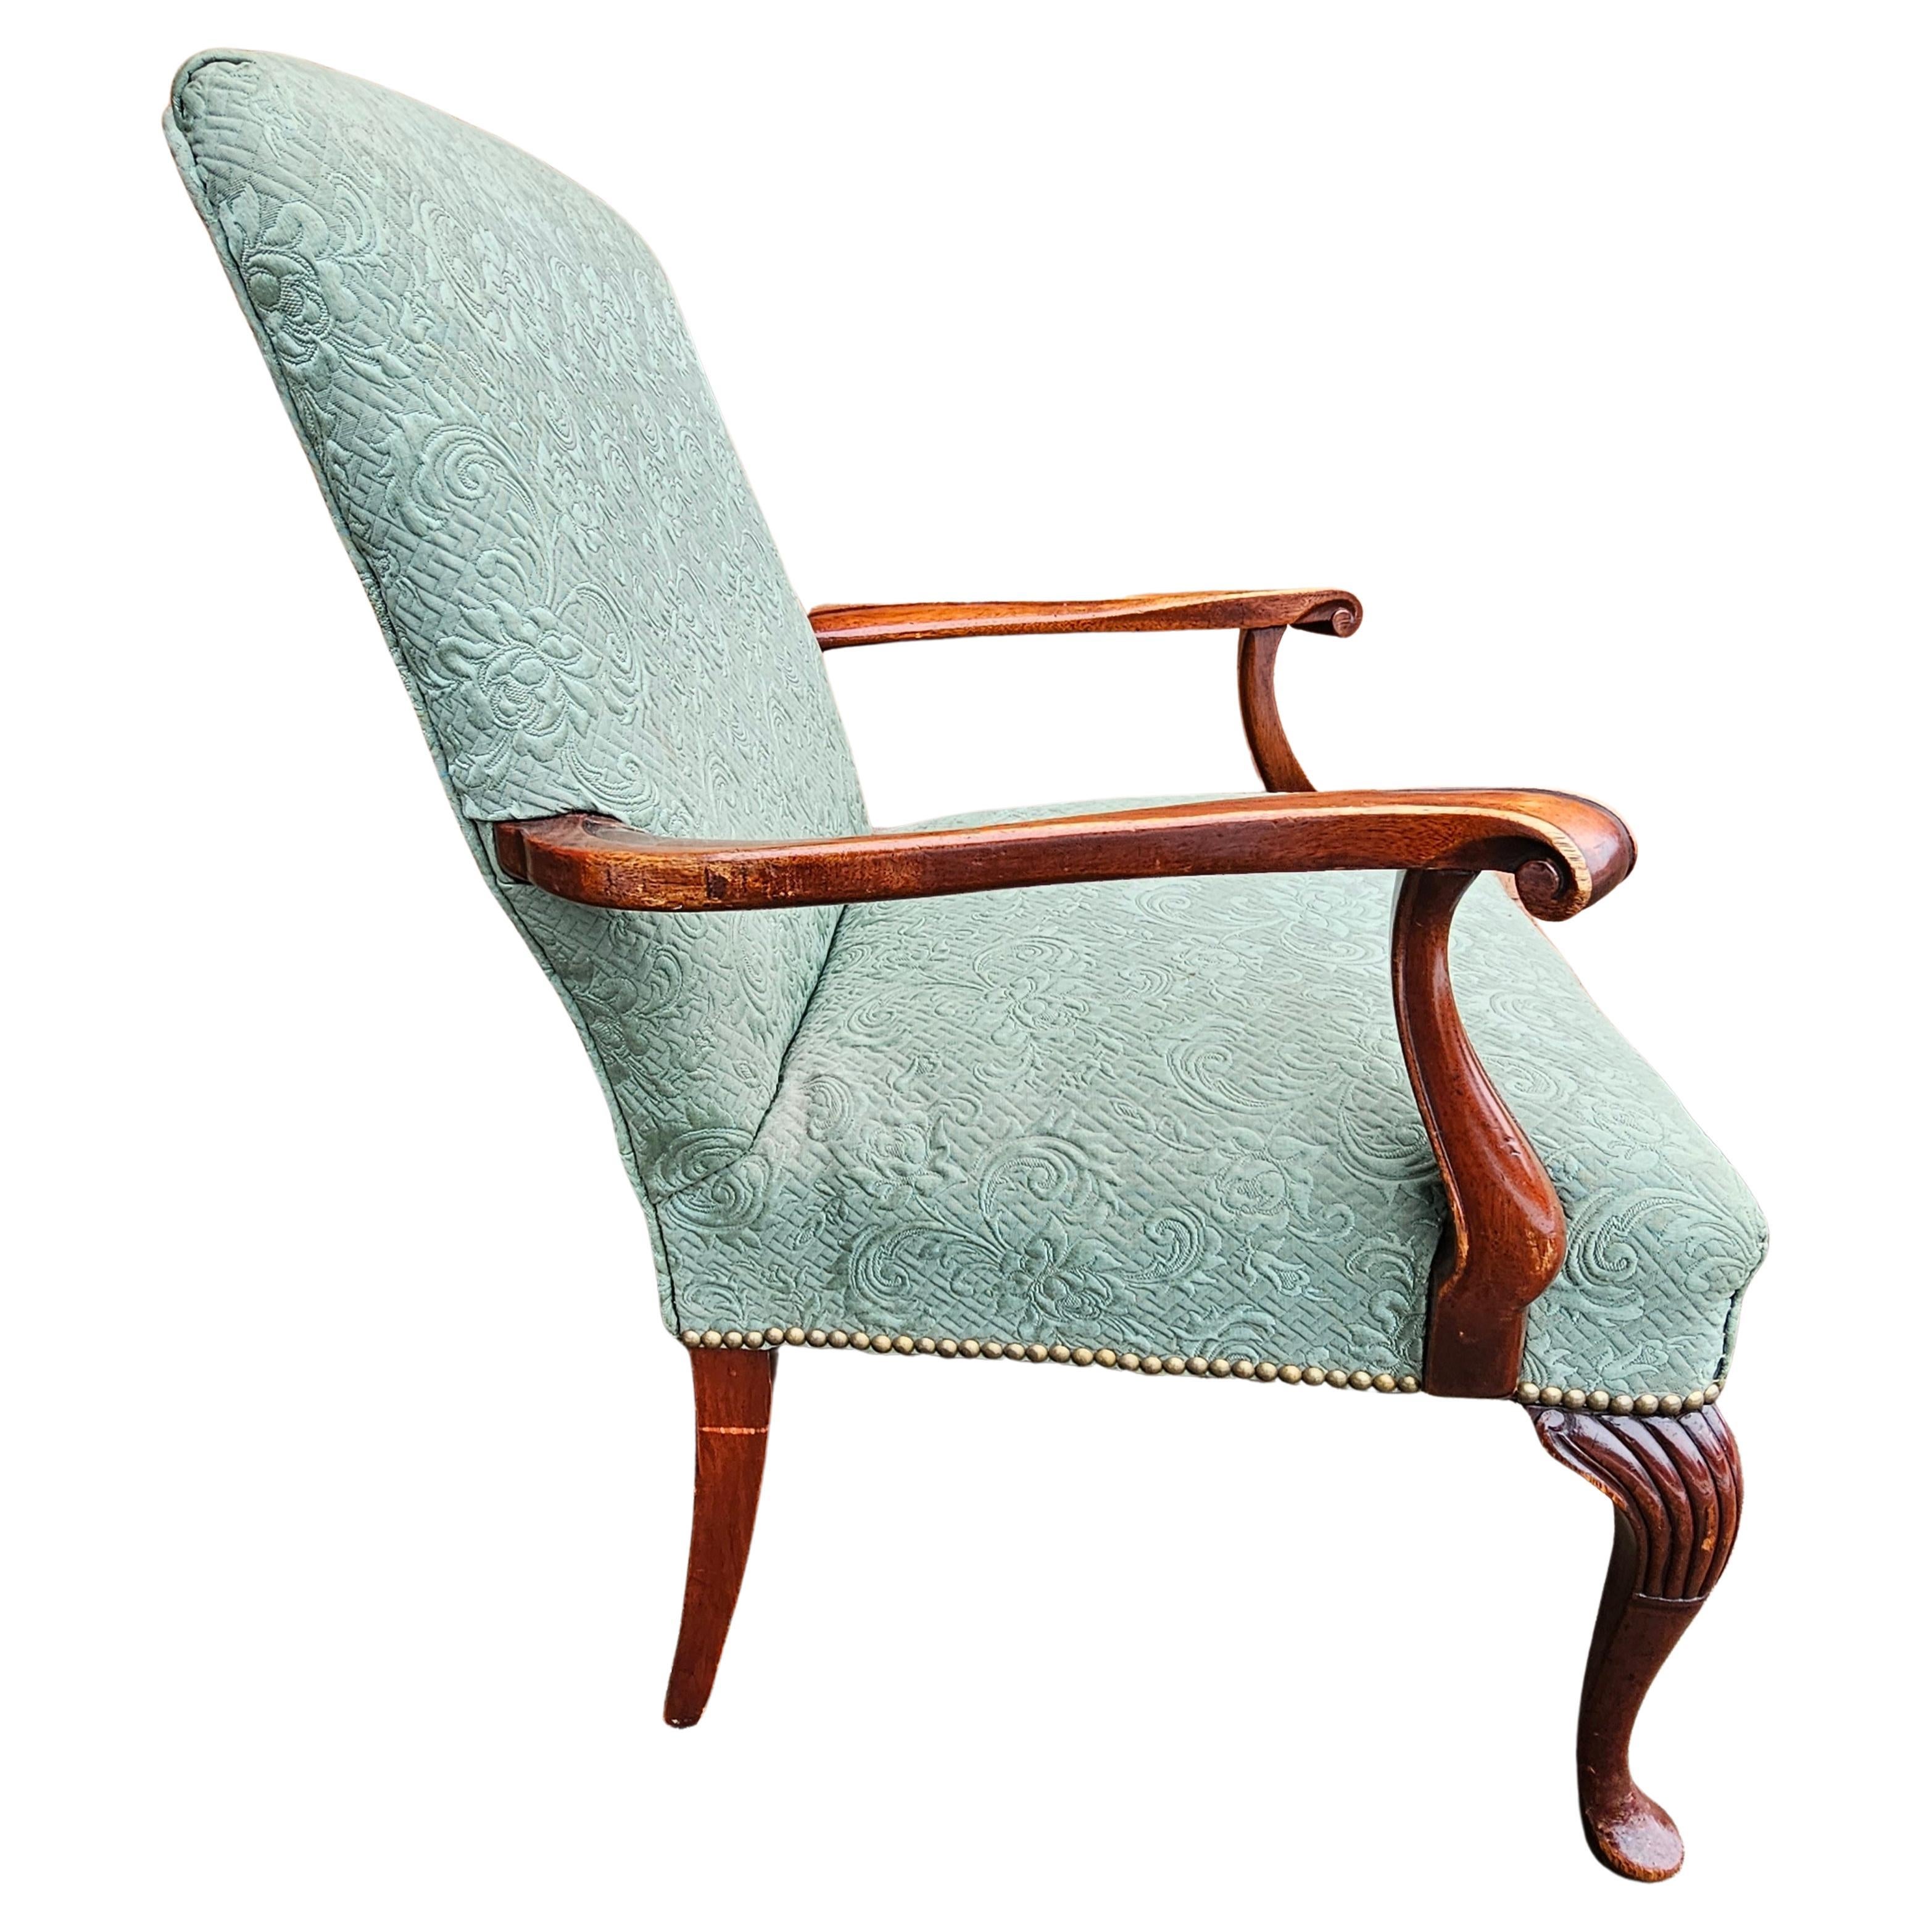 Other Mid 20th Century Queen Anne Style Mahogany Upholstered Armchair For Sale